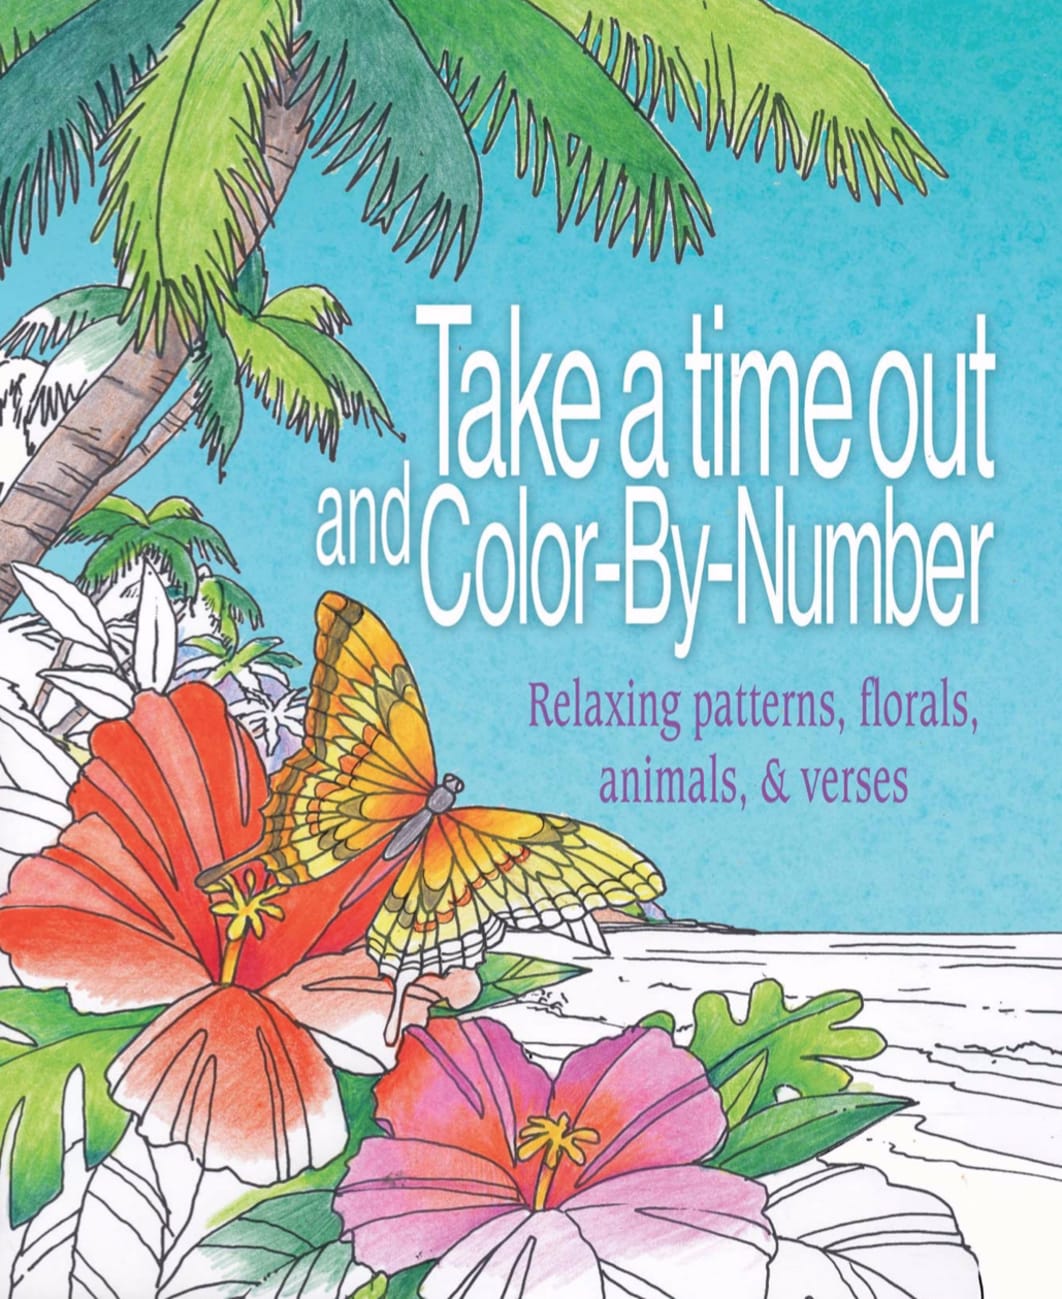 Take a Time Out and Color By Number: Relaxing Patterns, Florals, Animals & Verses (Adult Coloring Books Series) Paperback